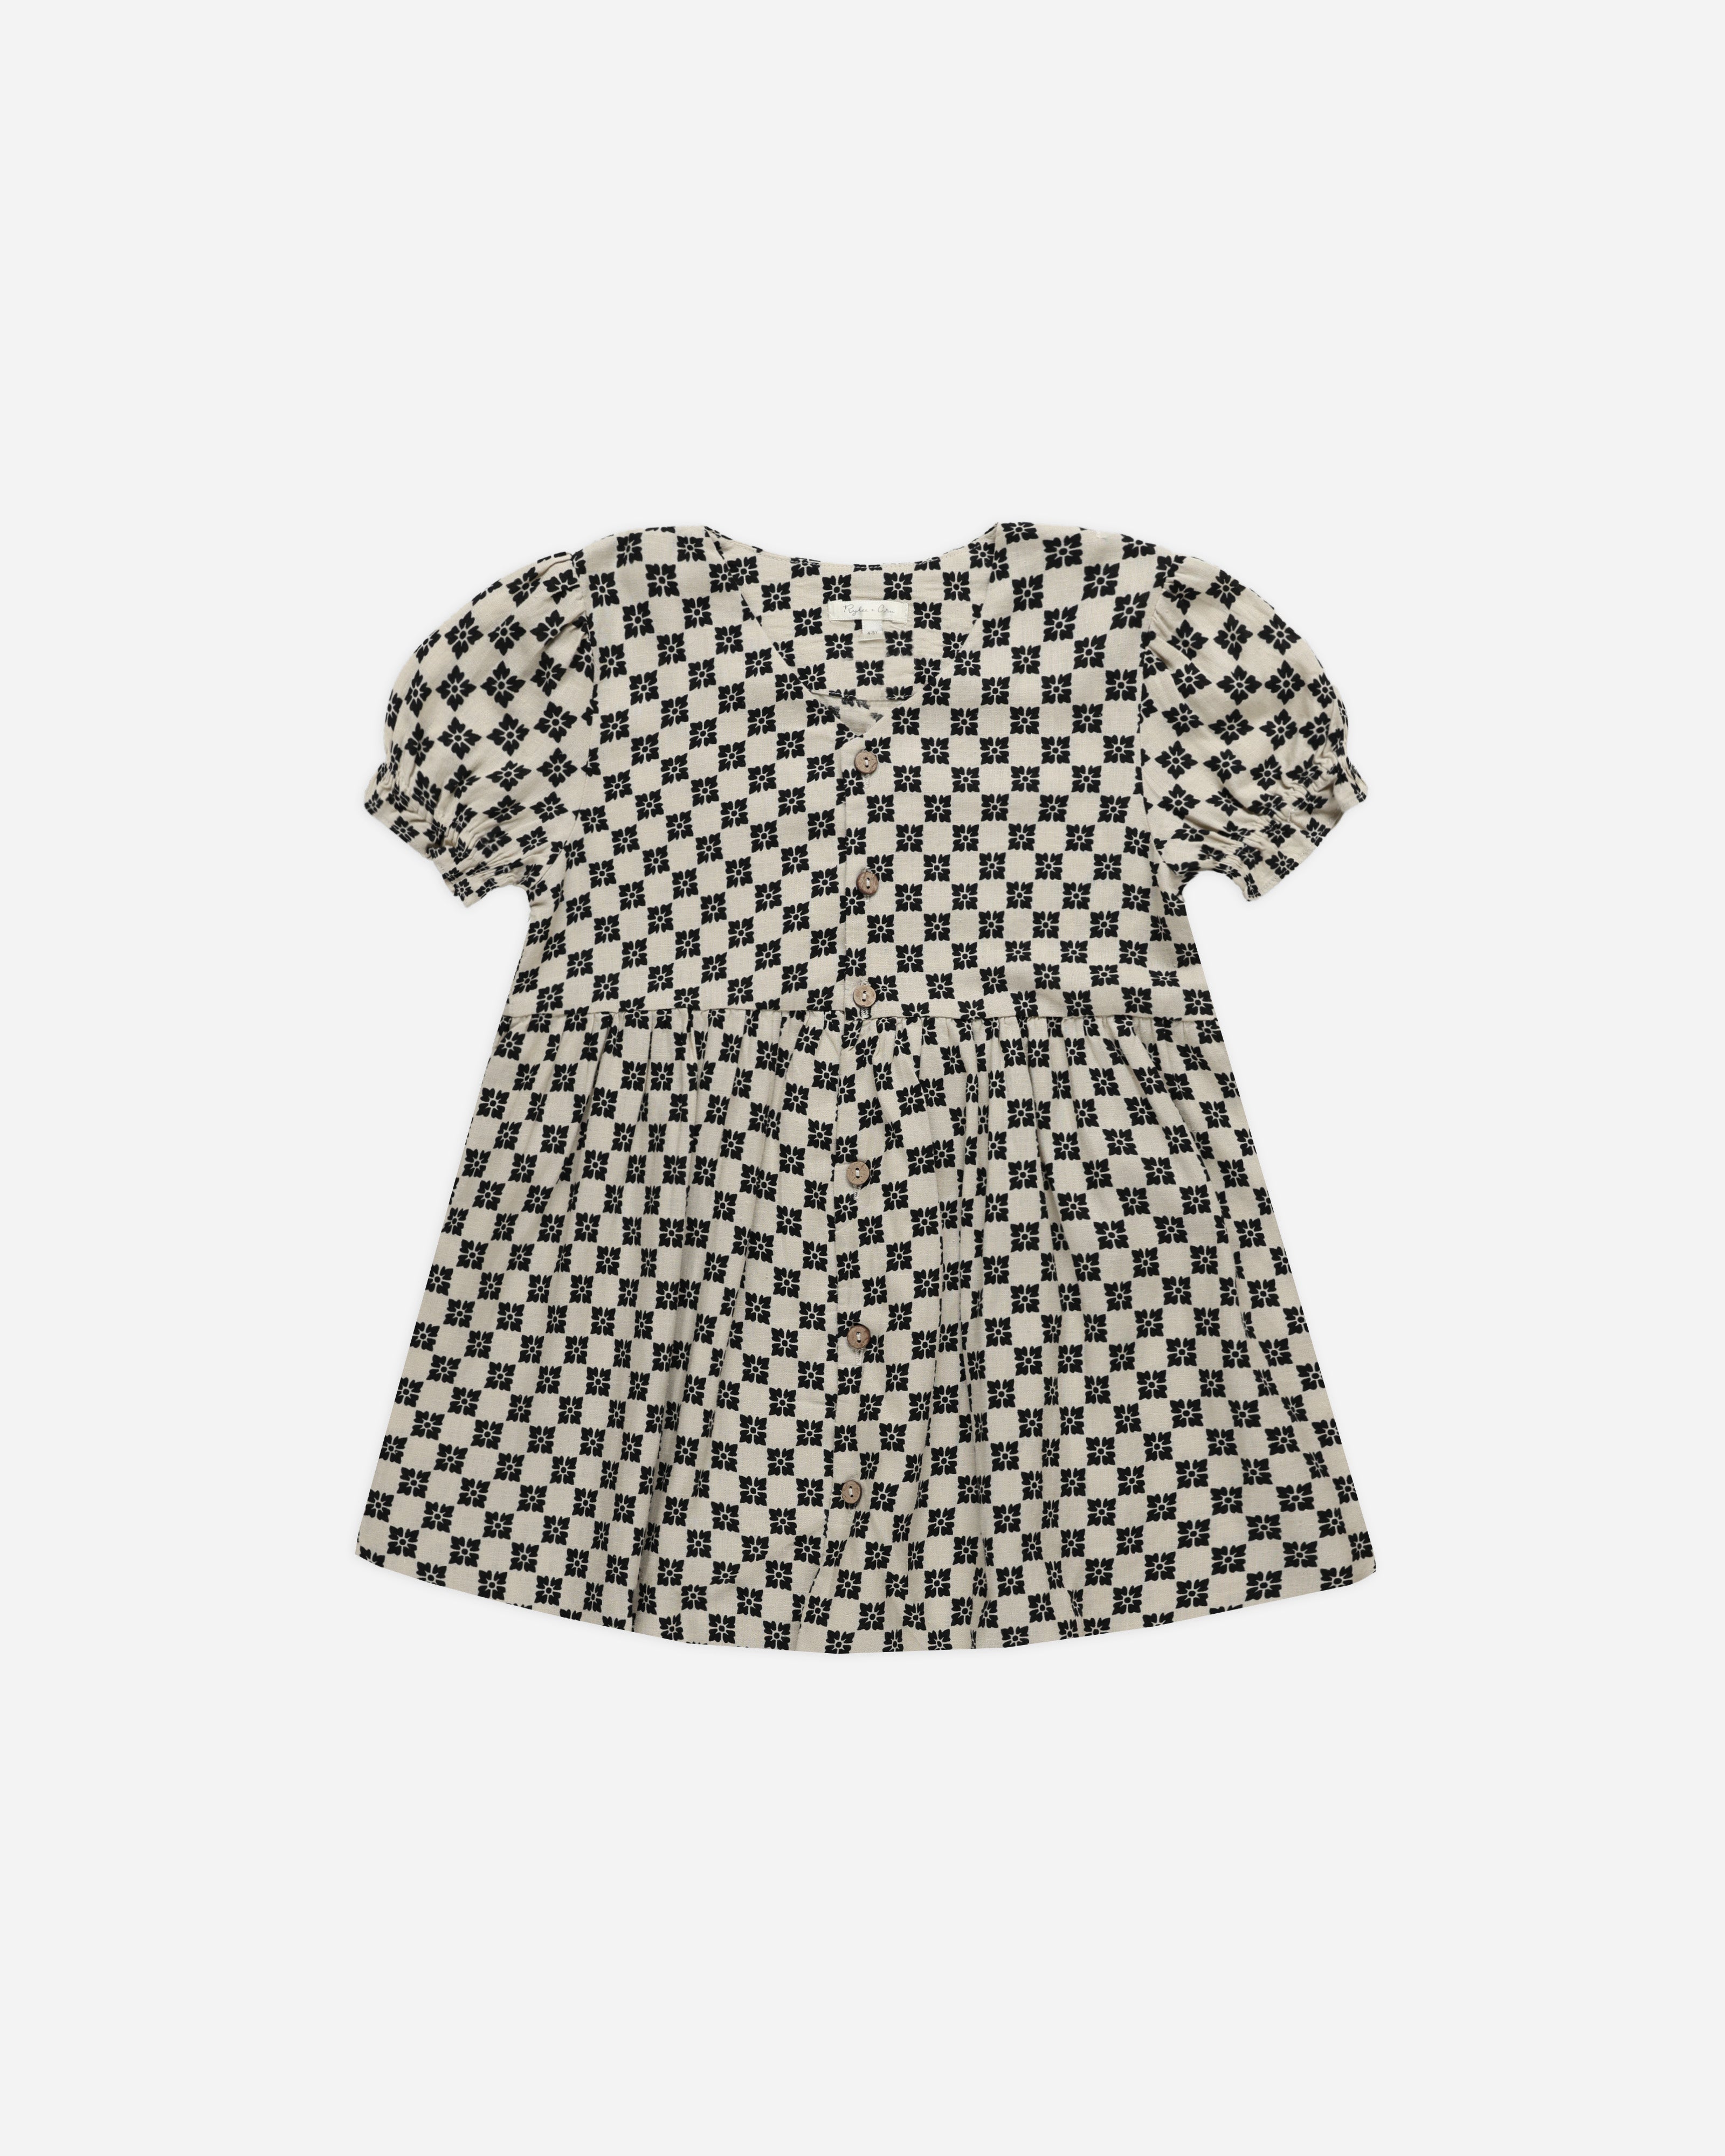 Jeanette Dress || Flower Check - Rylee + Cru | Kids Clothes | Trendy Baby Clothes | Modern Infant Outfits |